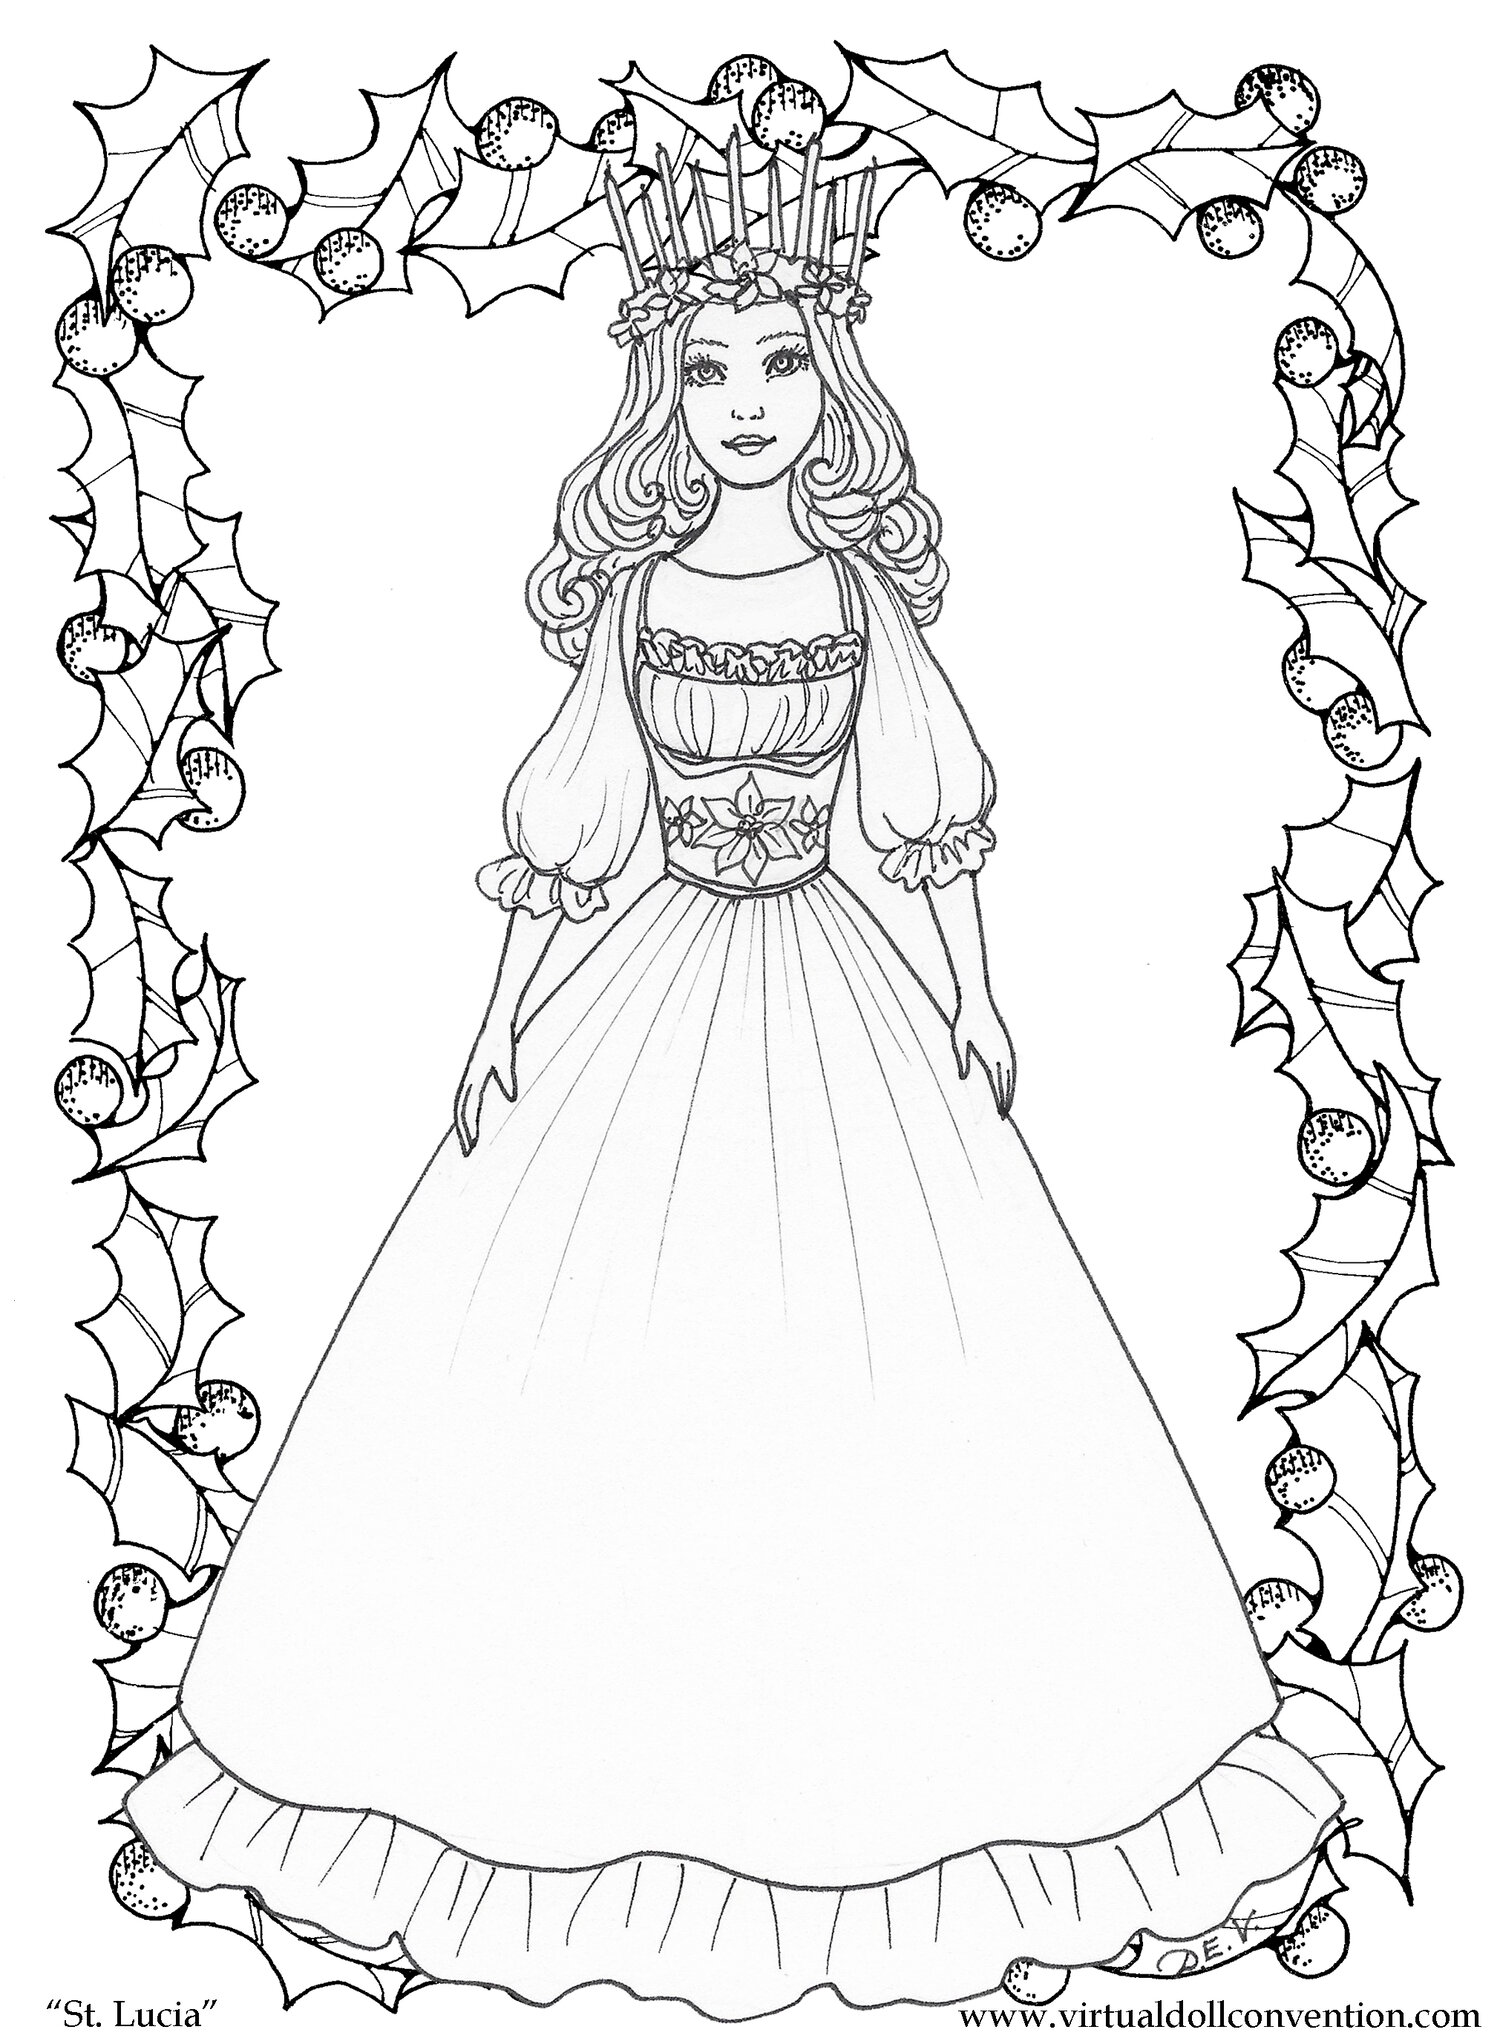 Grace santa lucia coloring page by diana vining free digital download â virtual doll convention